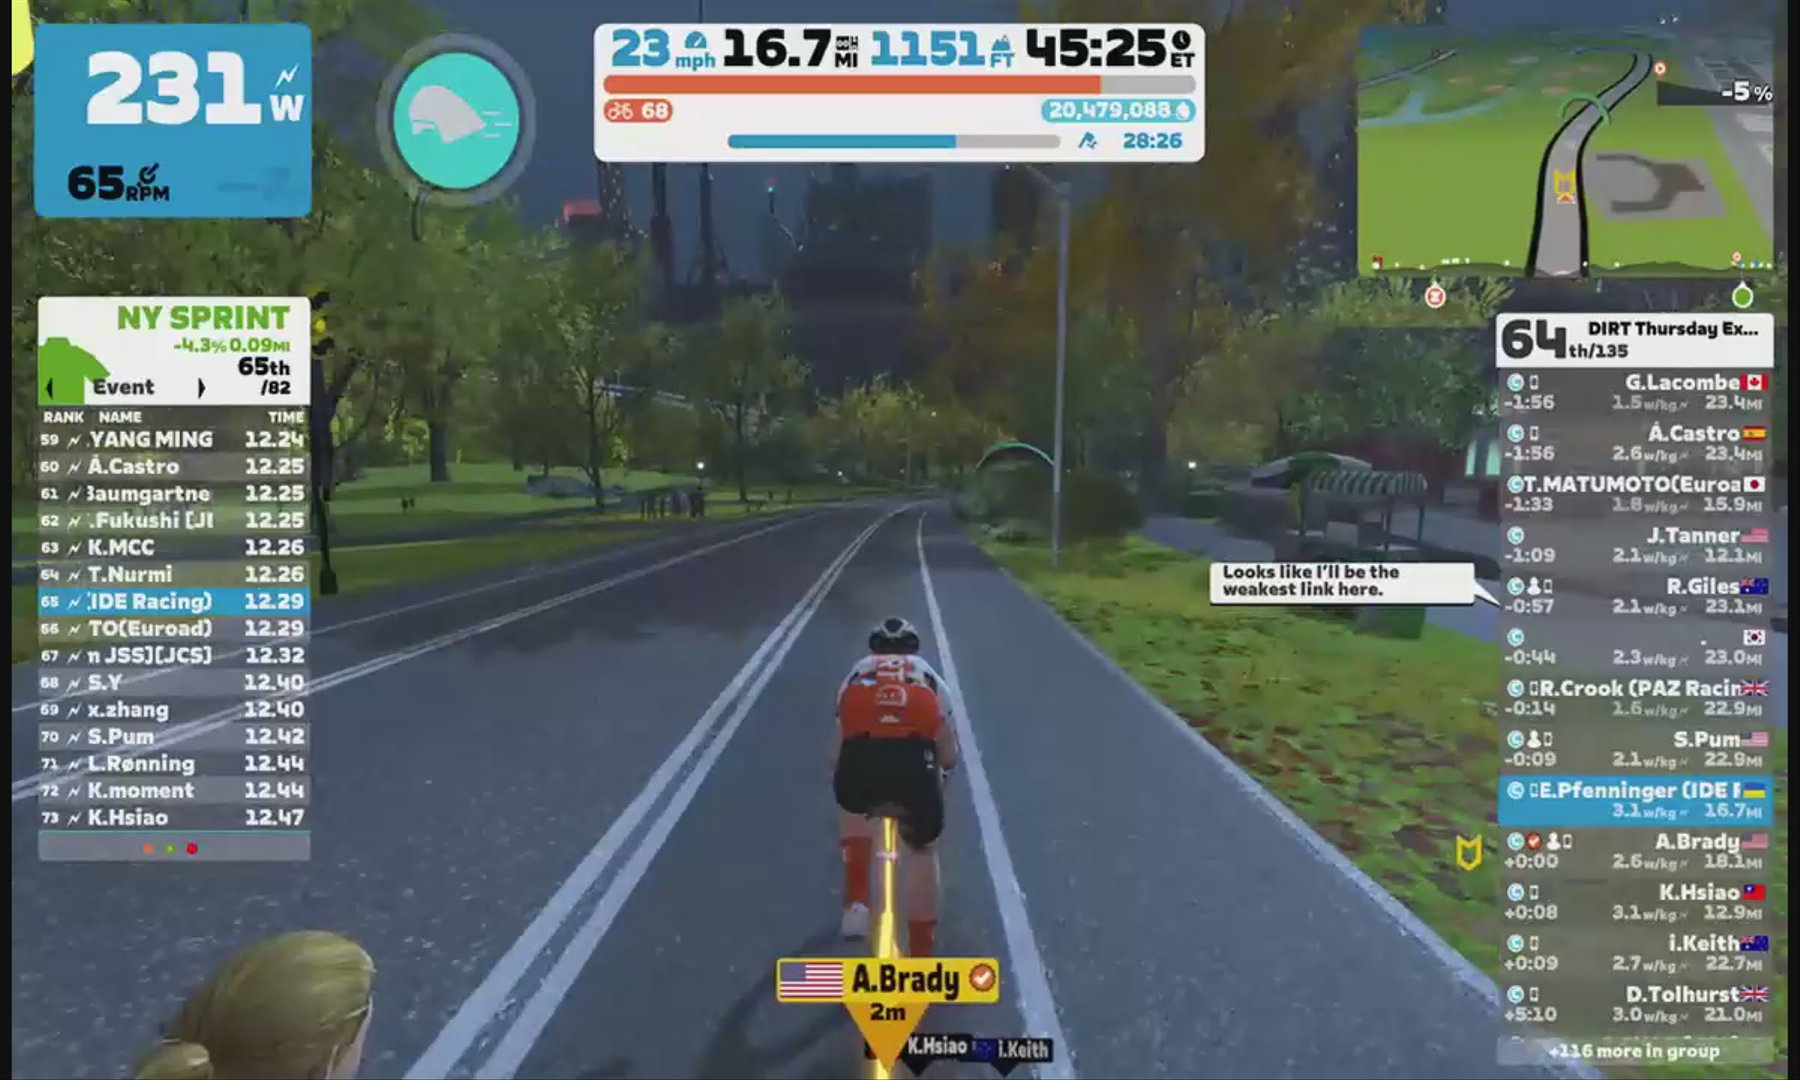 Zwift - Group Ride: DIRT Thursday Express (C) on Park Perimeter Loop in New York